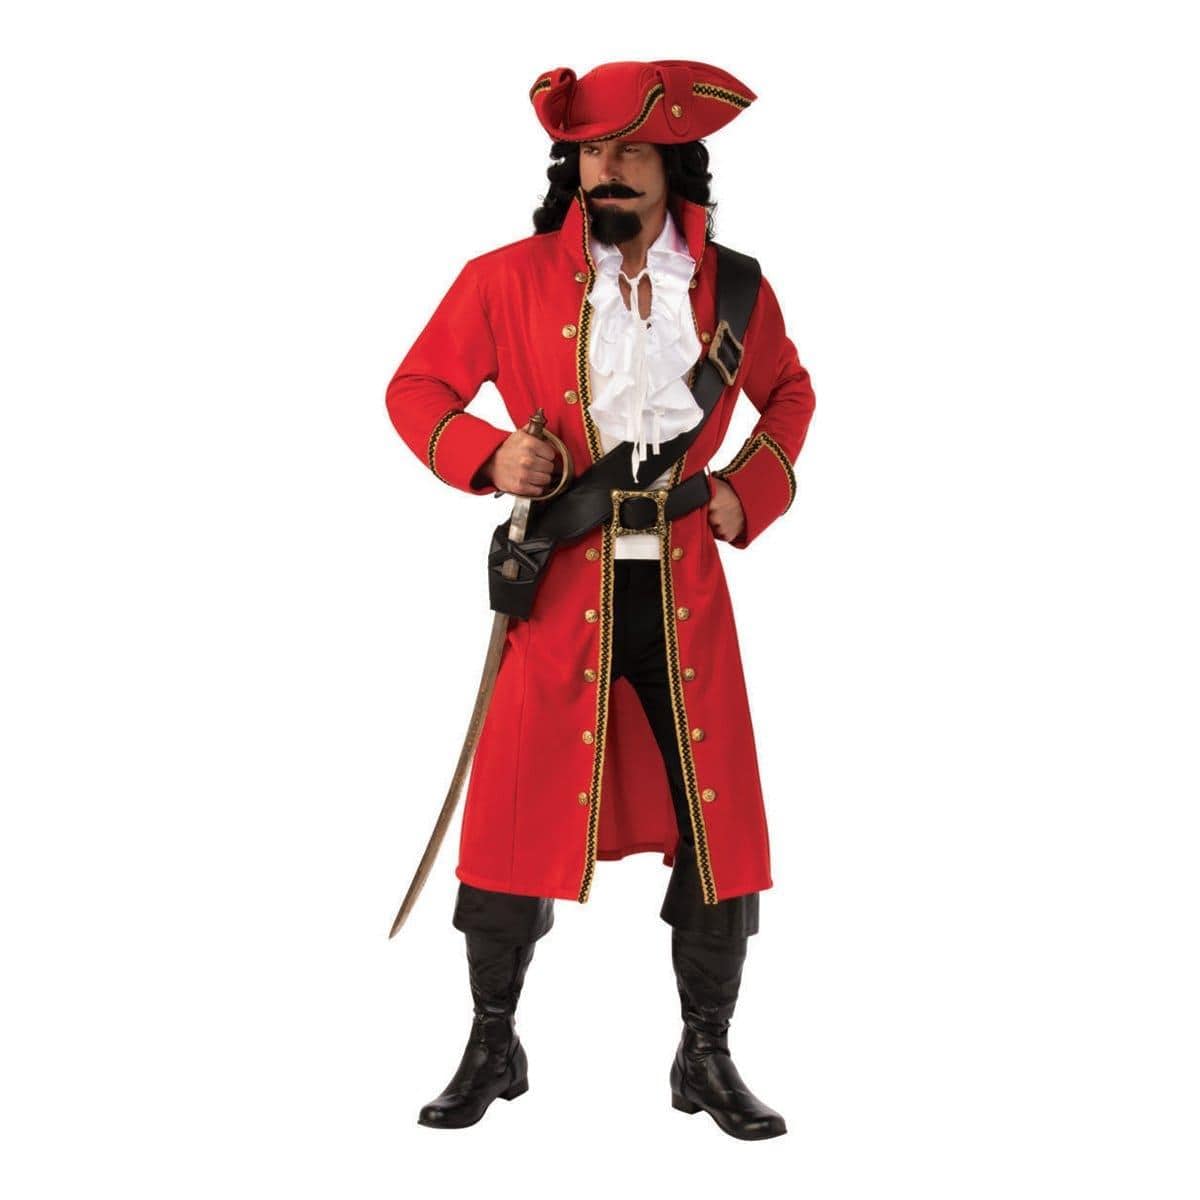 Buy Costumes Pirate Captain Costume for Adults sold at Party Expert